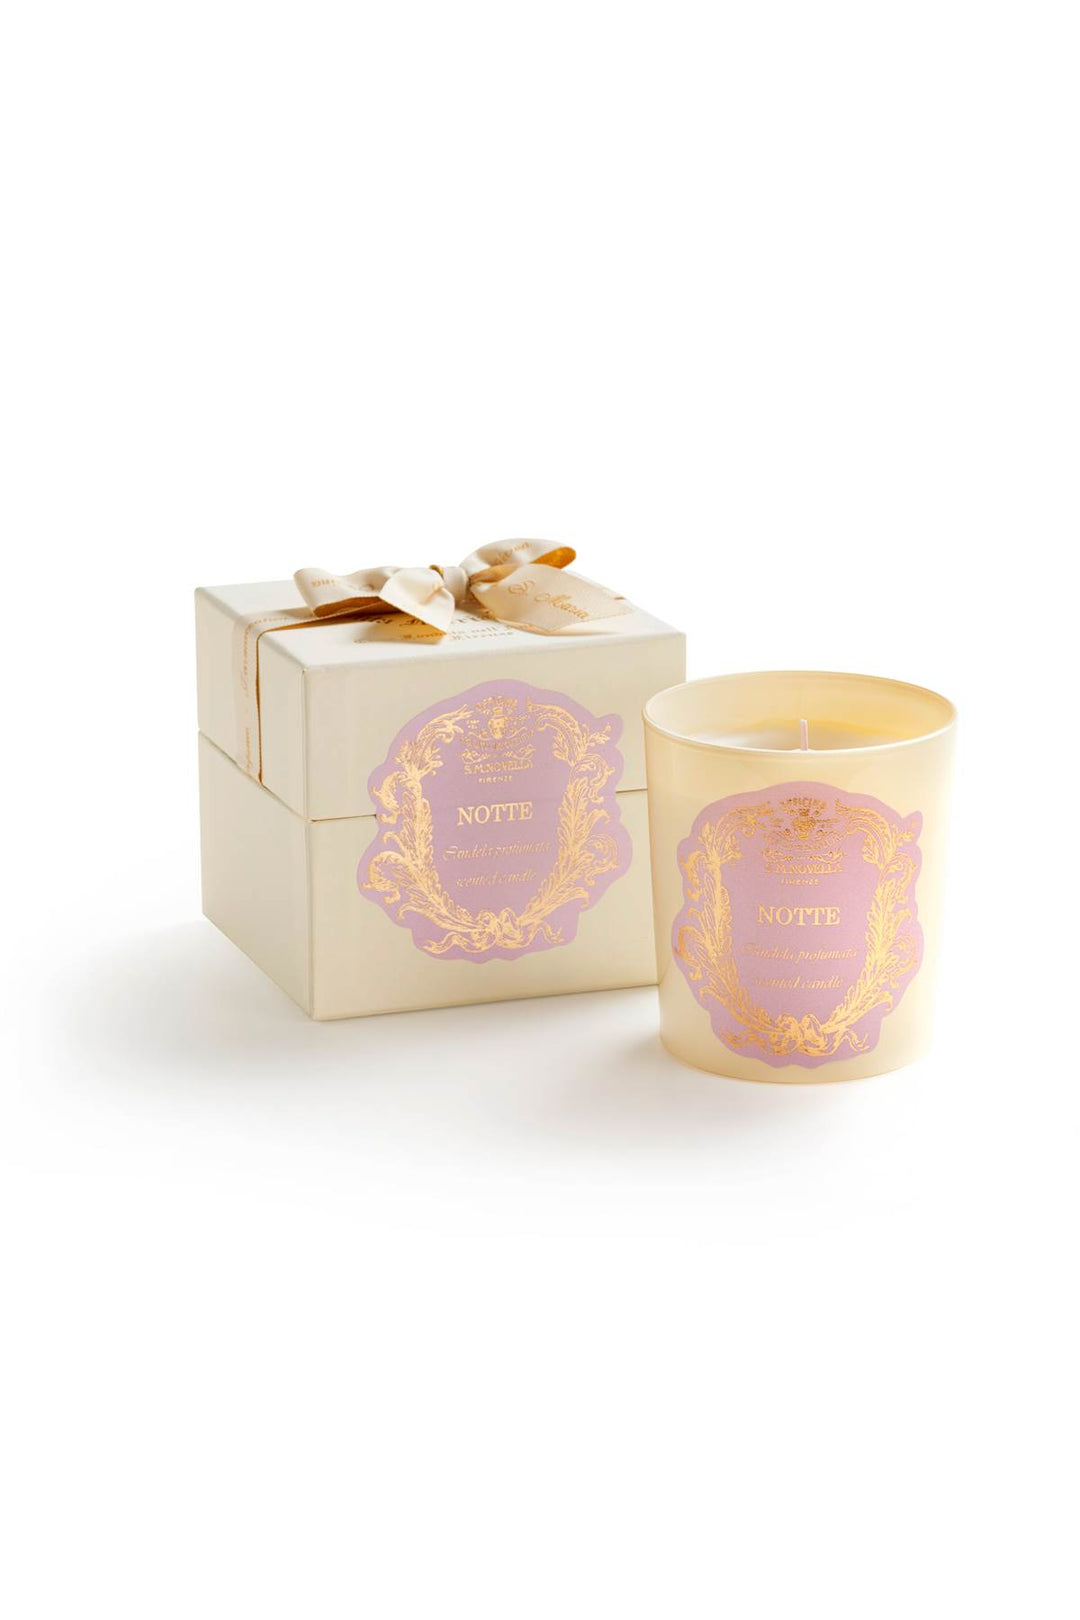 notte scented candle - 250g-0